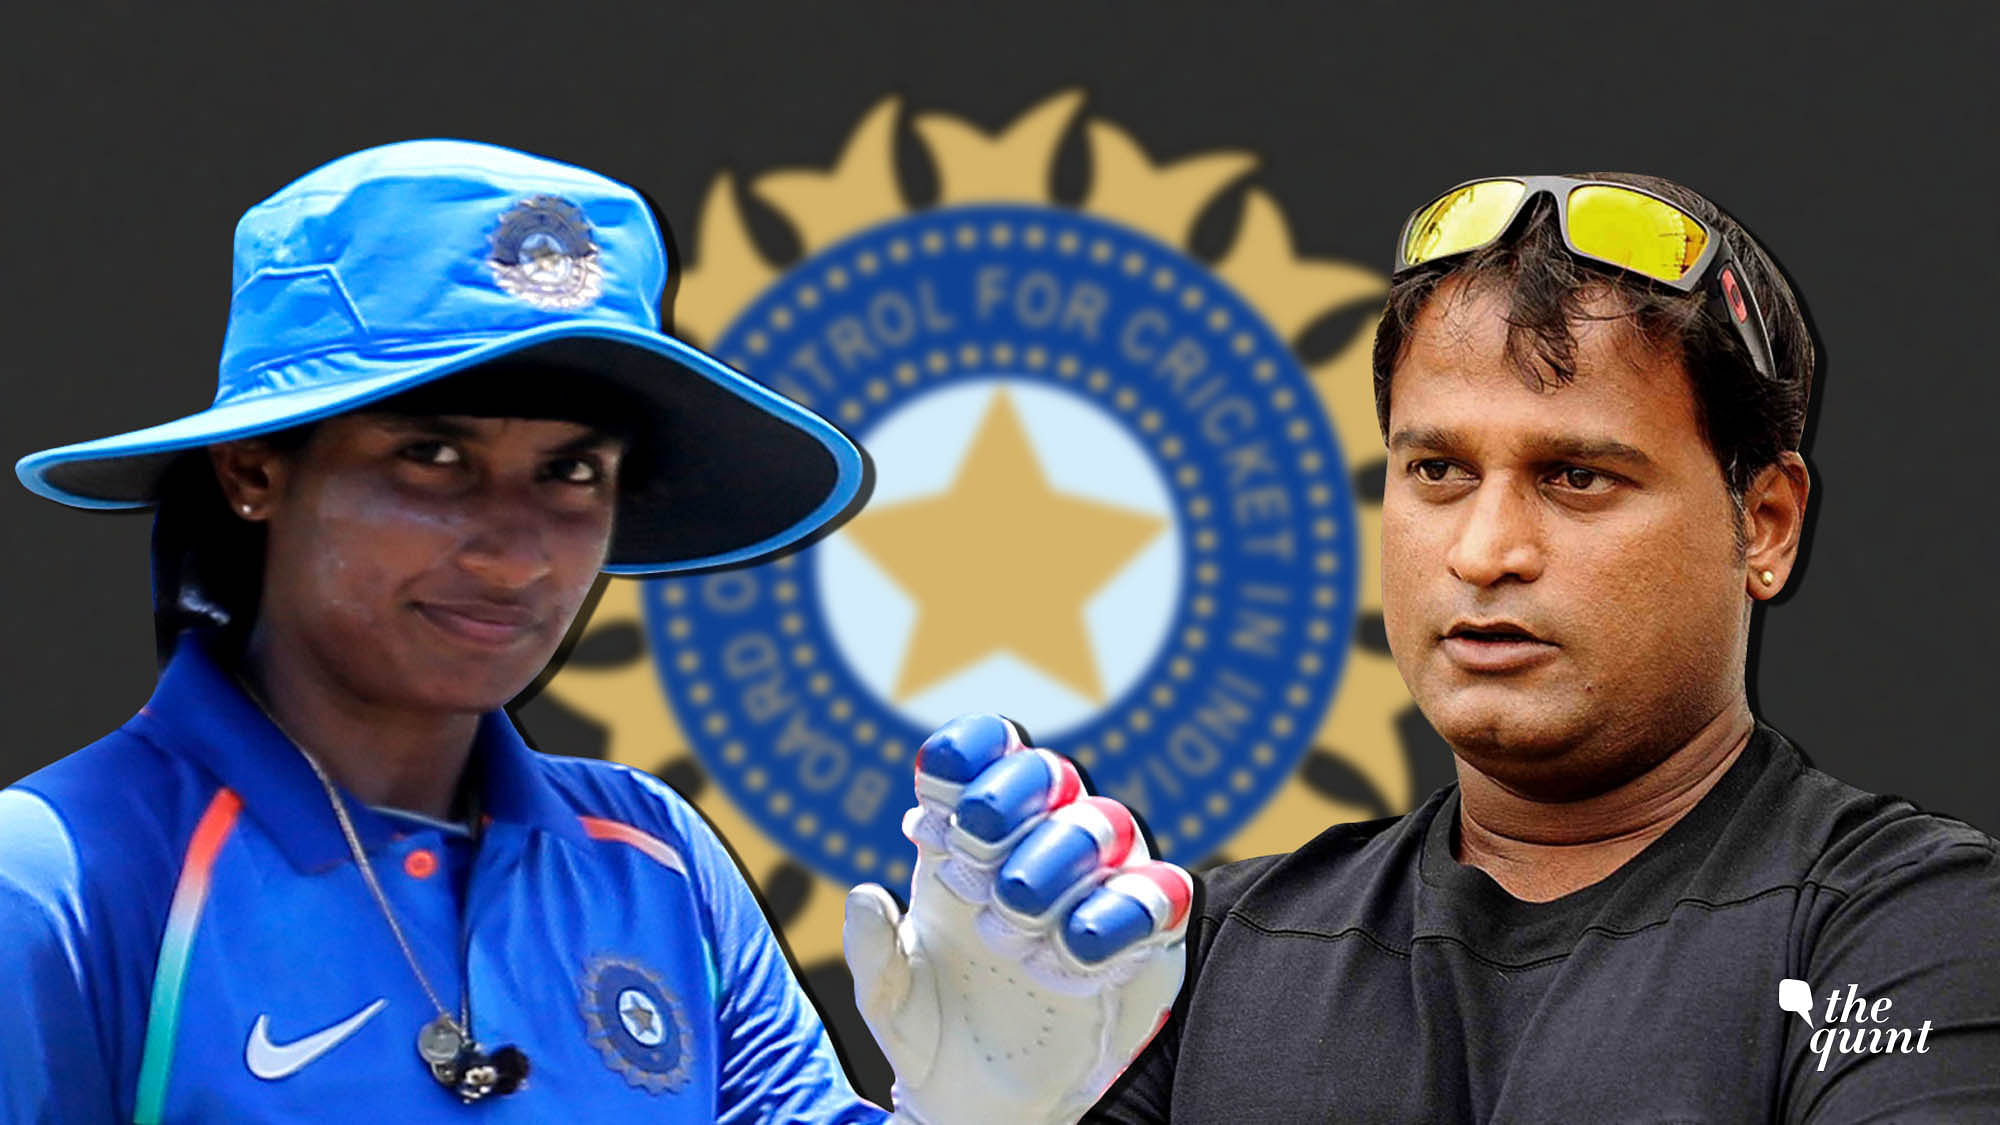 Mithali Raj and Ramesh Powar are embroiled in a controversy after Raj was dropped from the Indian team for the Women’s World T20 semi-final against England.